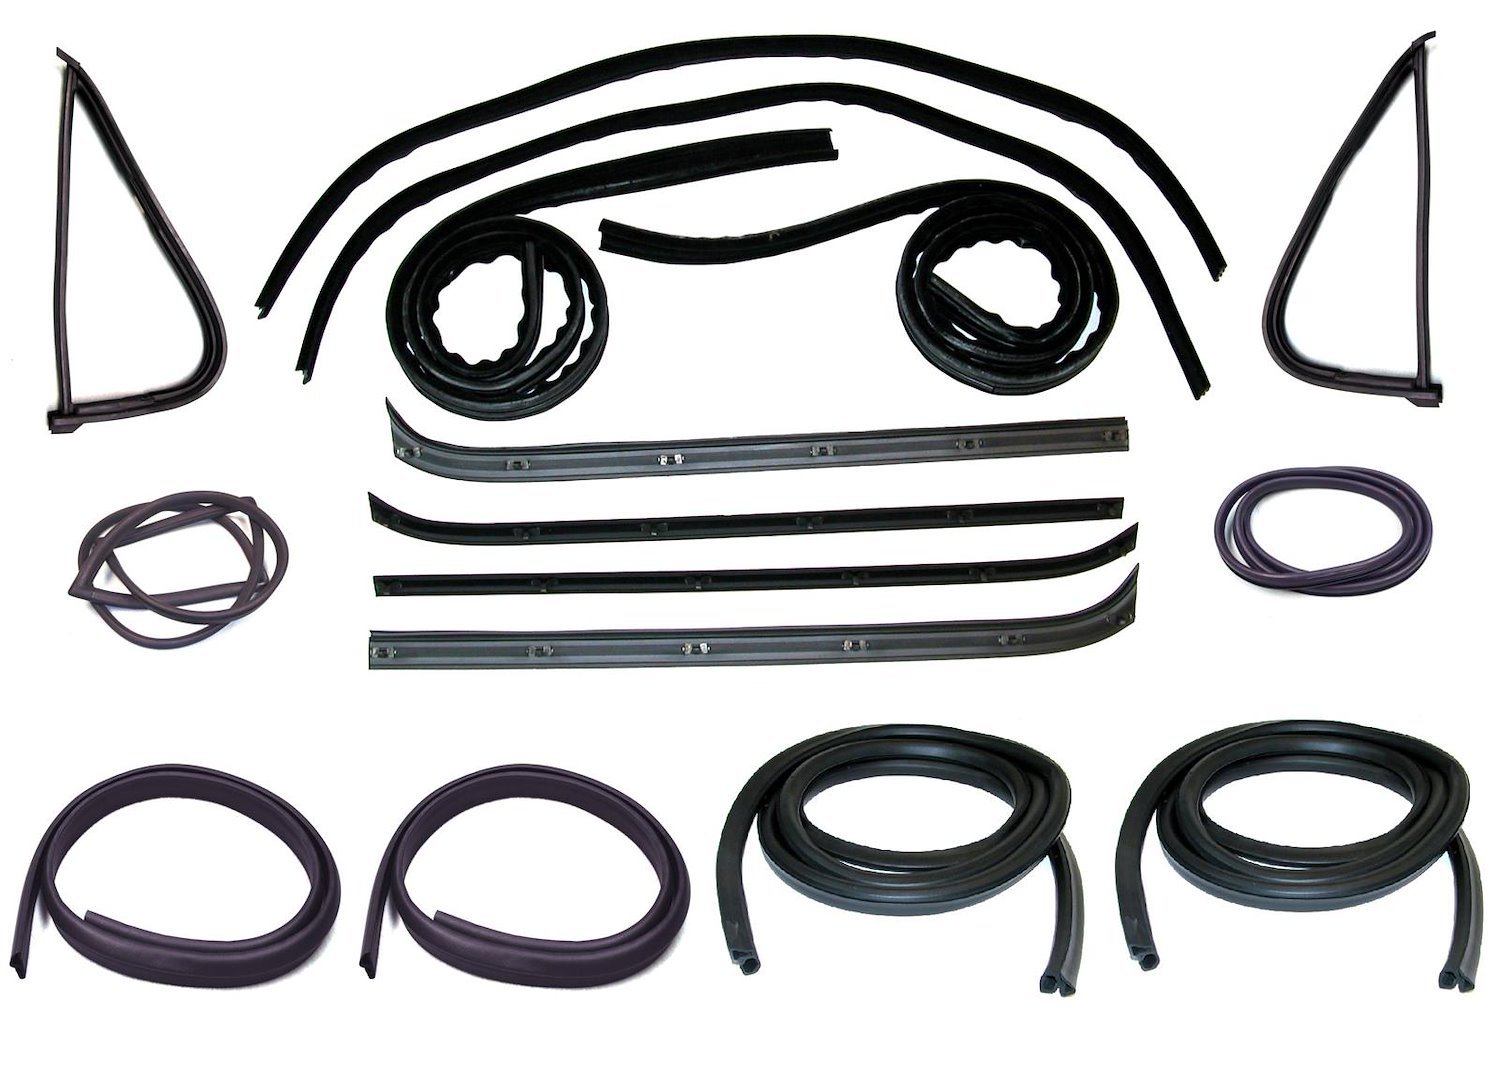 Belt Window Weather-strip Kit Fits 1973-1979 Ford F-150, F-250, F-350, F-500 Truck [Inner/Outer, Left/Driver & Right/Passenger]